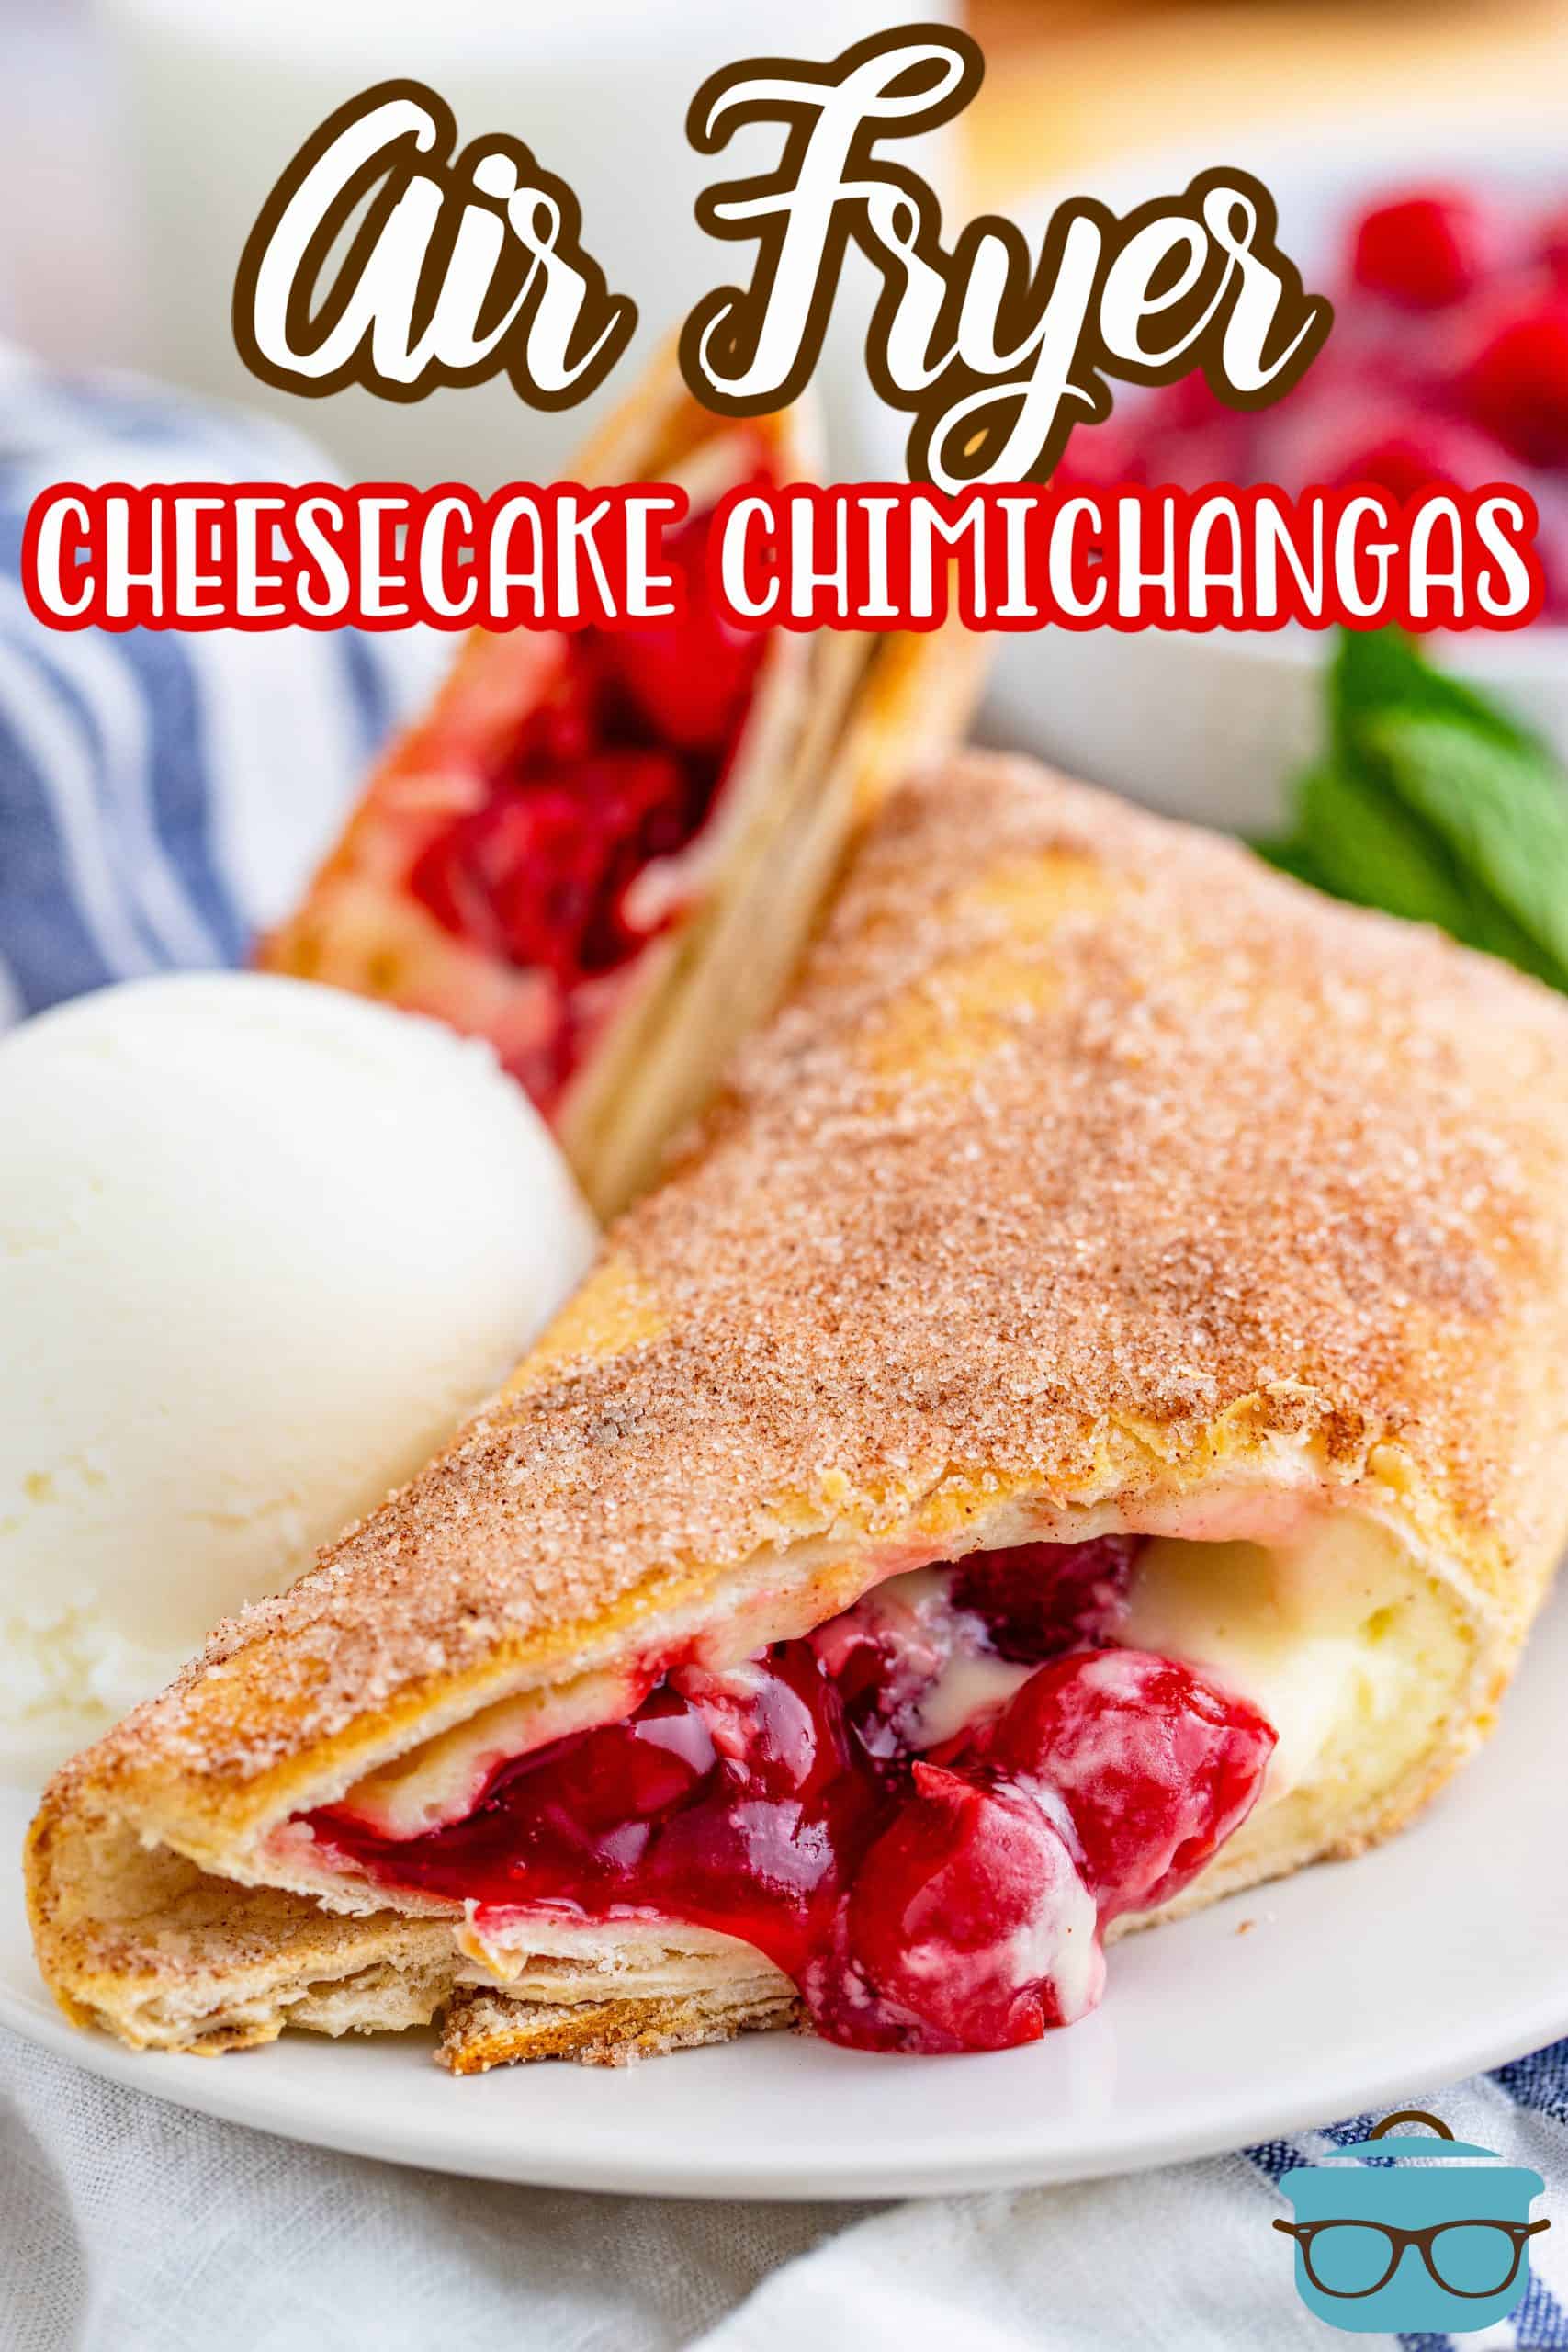 Close up of one cut open Air Fryer Cheesecake Chimichanga showing cherry cheesecake filling Pinterest image.